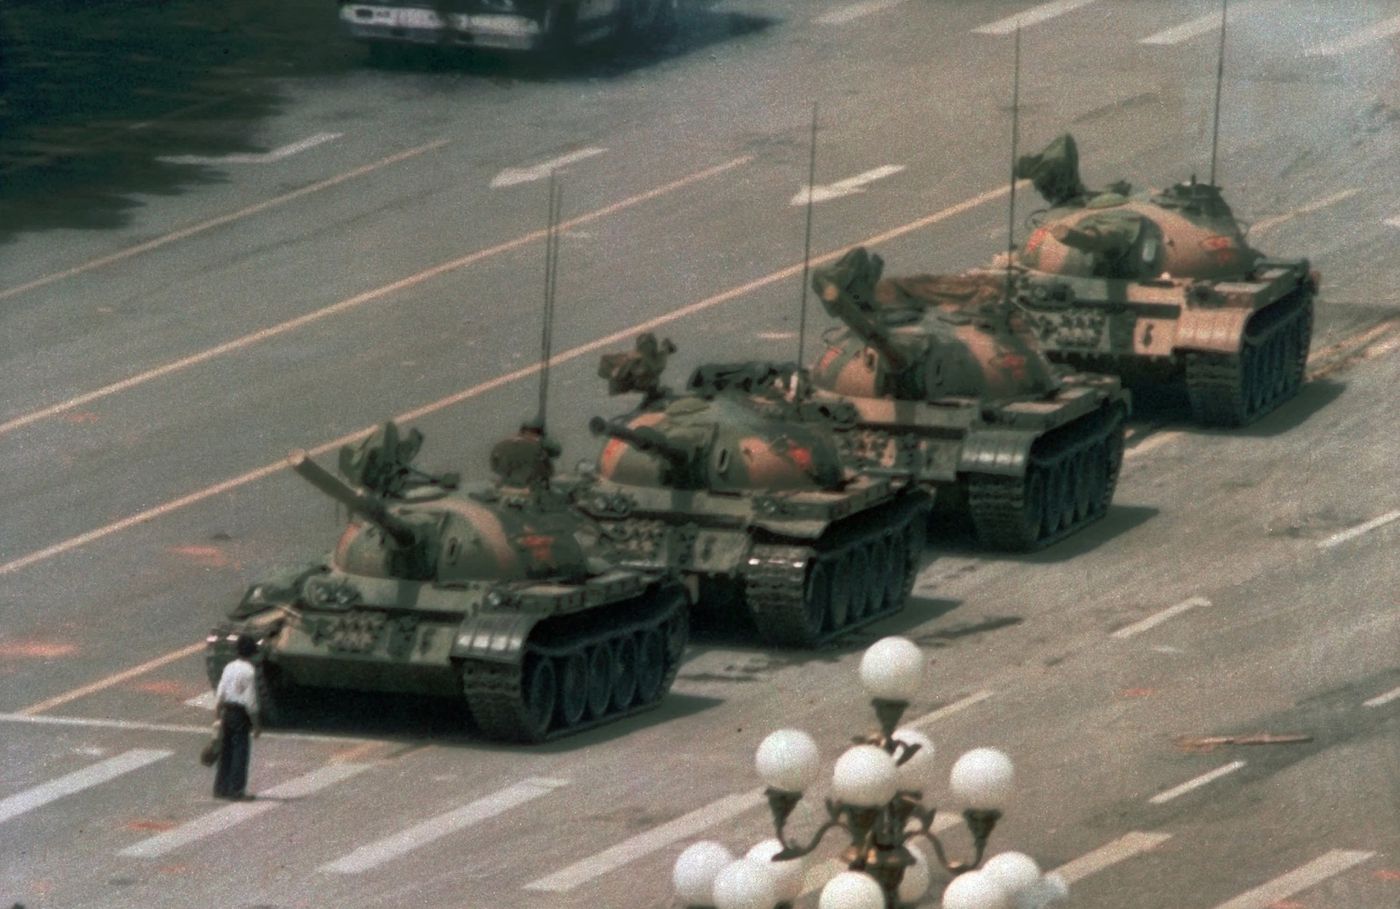 In this June 5, 1989 file photo, a Chinese man stands alone to block a line of tanks heading east on Beijing's Changan Boulevard in Tiananmen Square. The man, calling for an end to the recent violence and bloodshed against pro-democracy demonstrators, was pulled away by bystanders, and the tanks continued on their way. Over seven weeks in 1989, student-led pro-democracy protests centered on Beijing’s Tiananmen Square became China’s greatest political upheaval since the end of the Cultural Revolution more than a decade earlier.